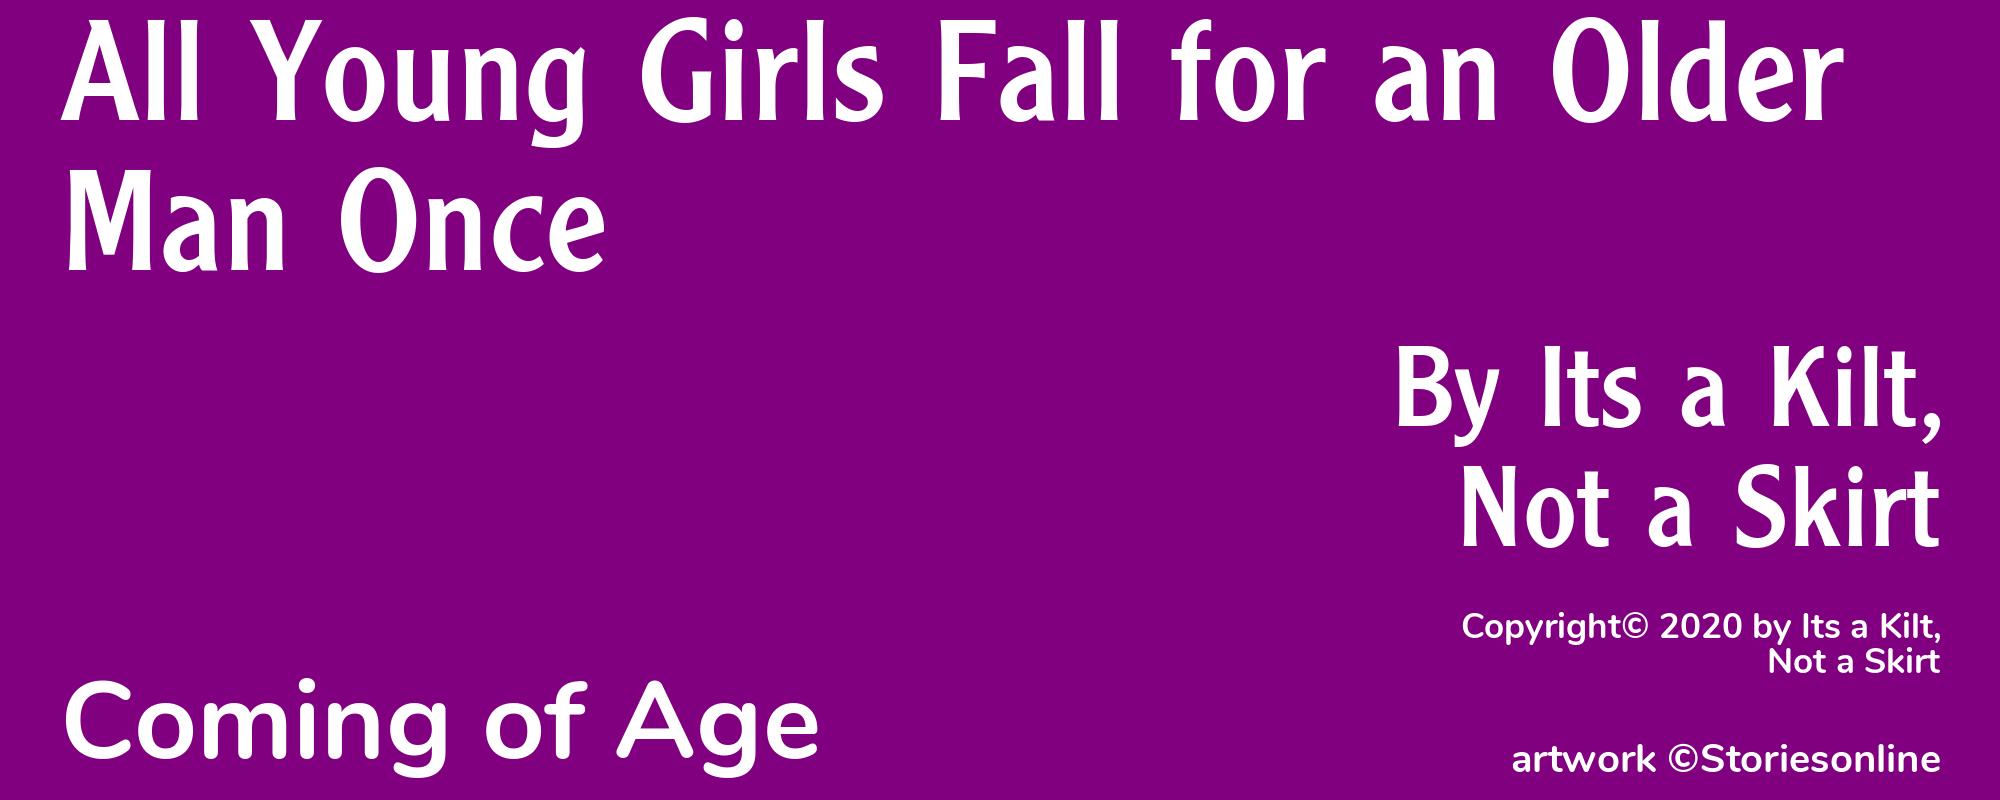 All Young Girls Fall for an Older Man Once - Cover